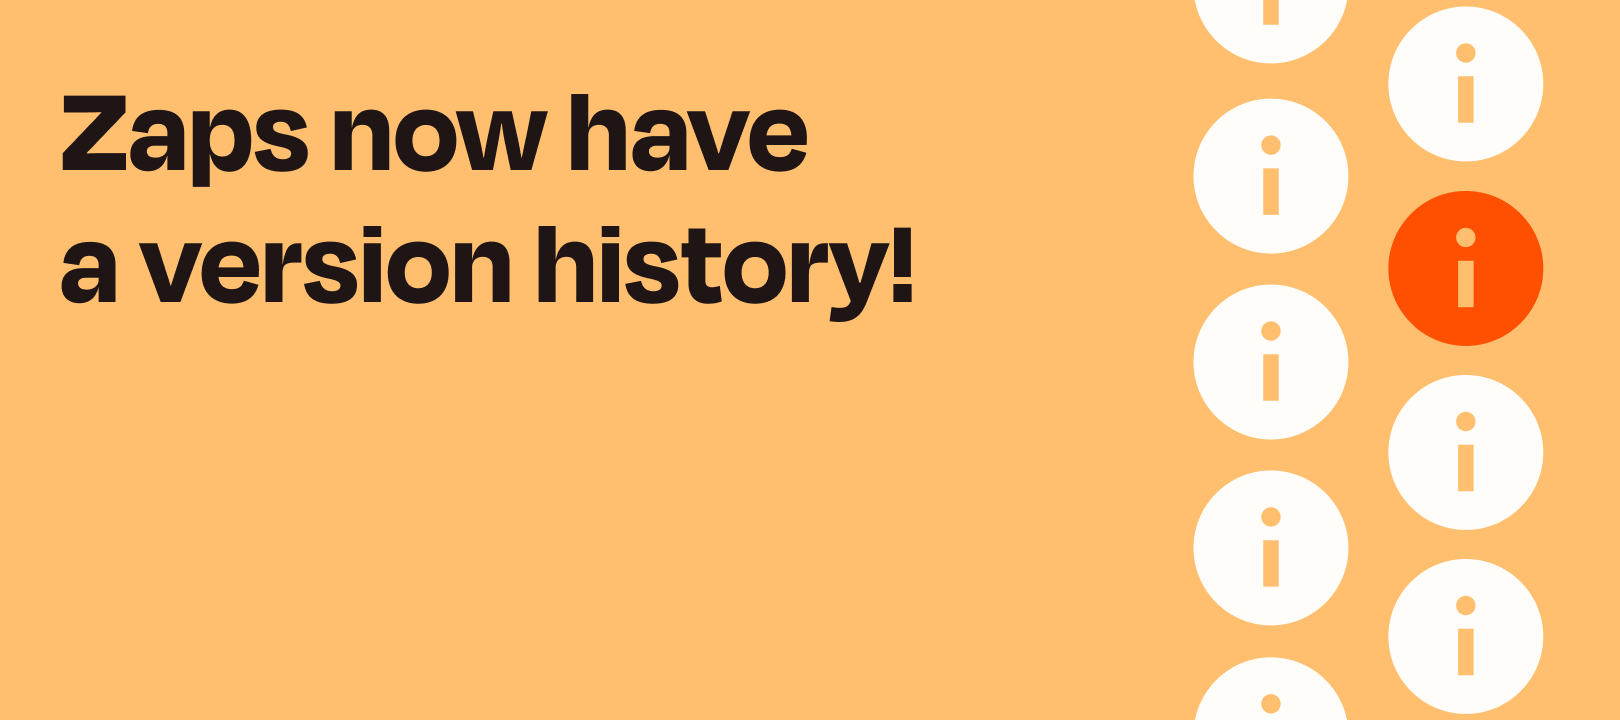 We've added Version History for your Zaps!